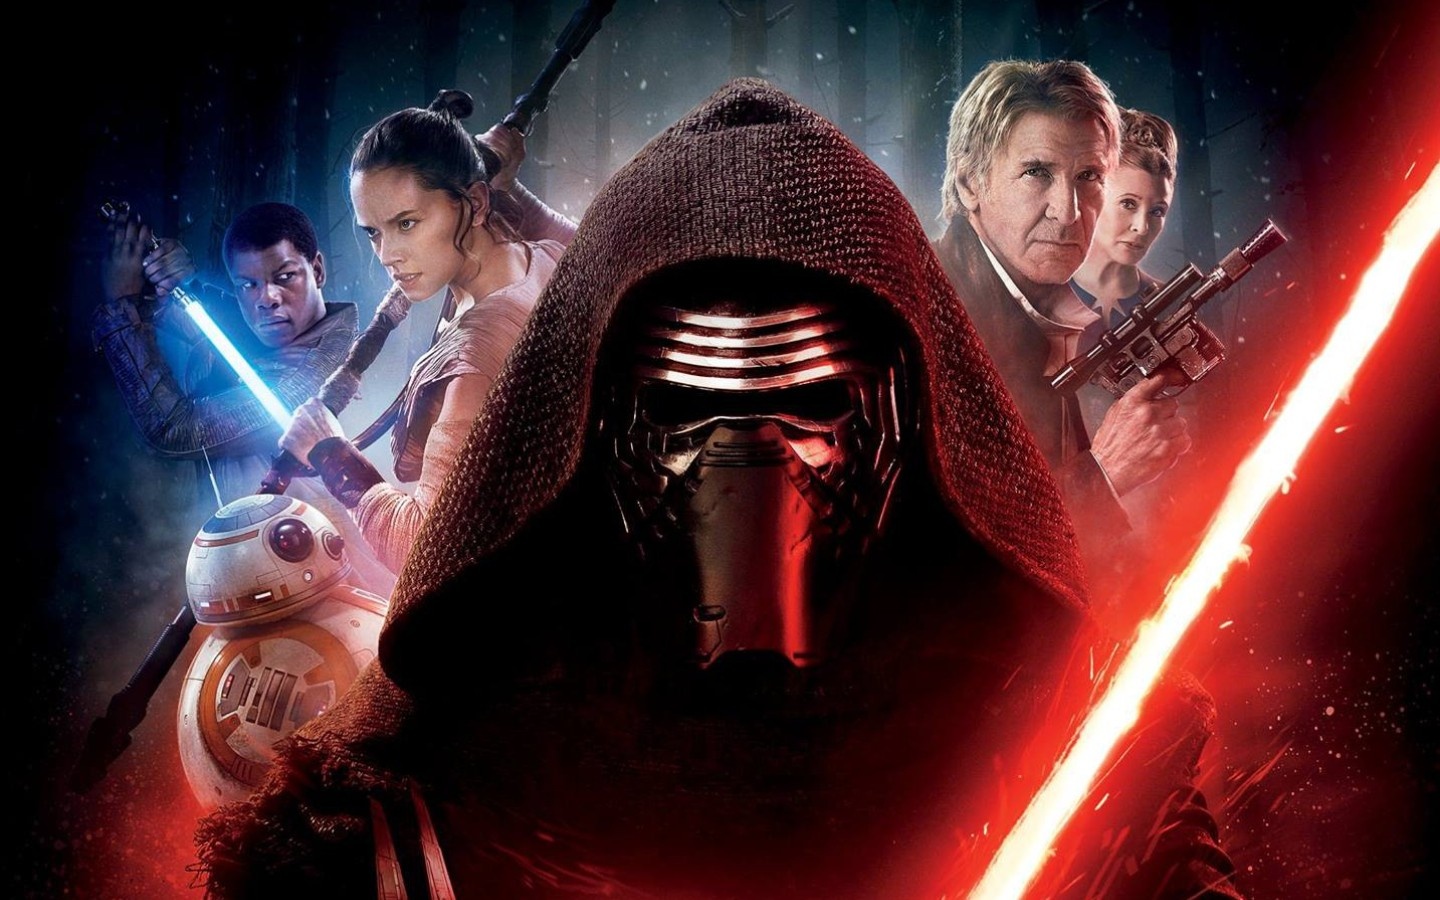 Psp Ipod Movies Star Wars: The Force Awakens (2015) 720p